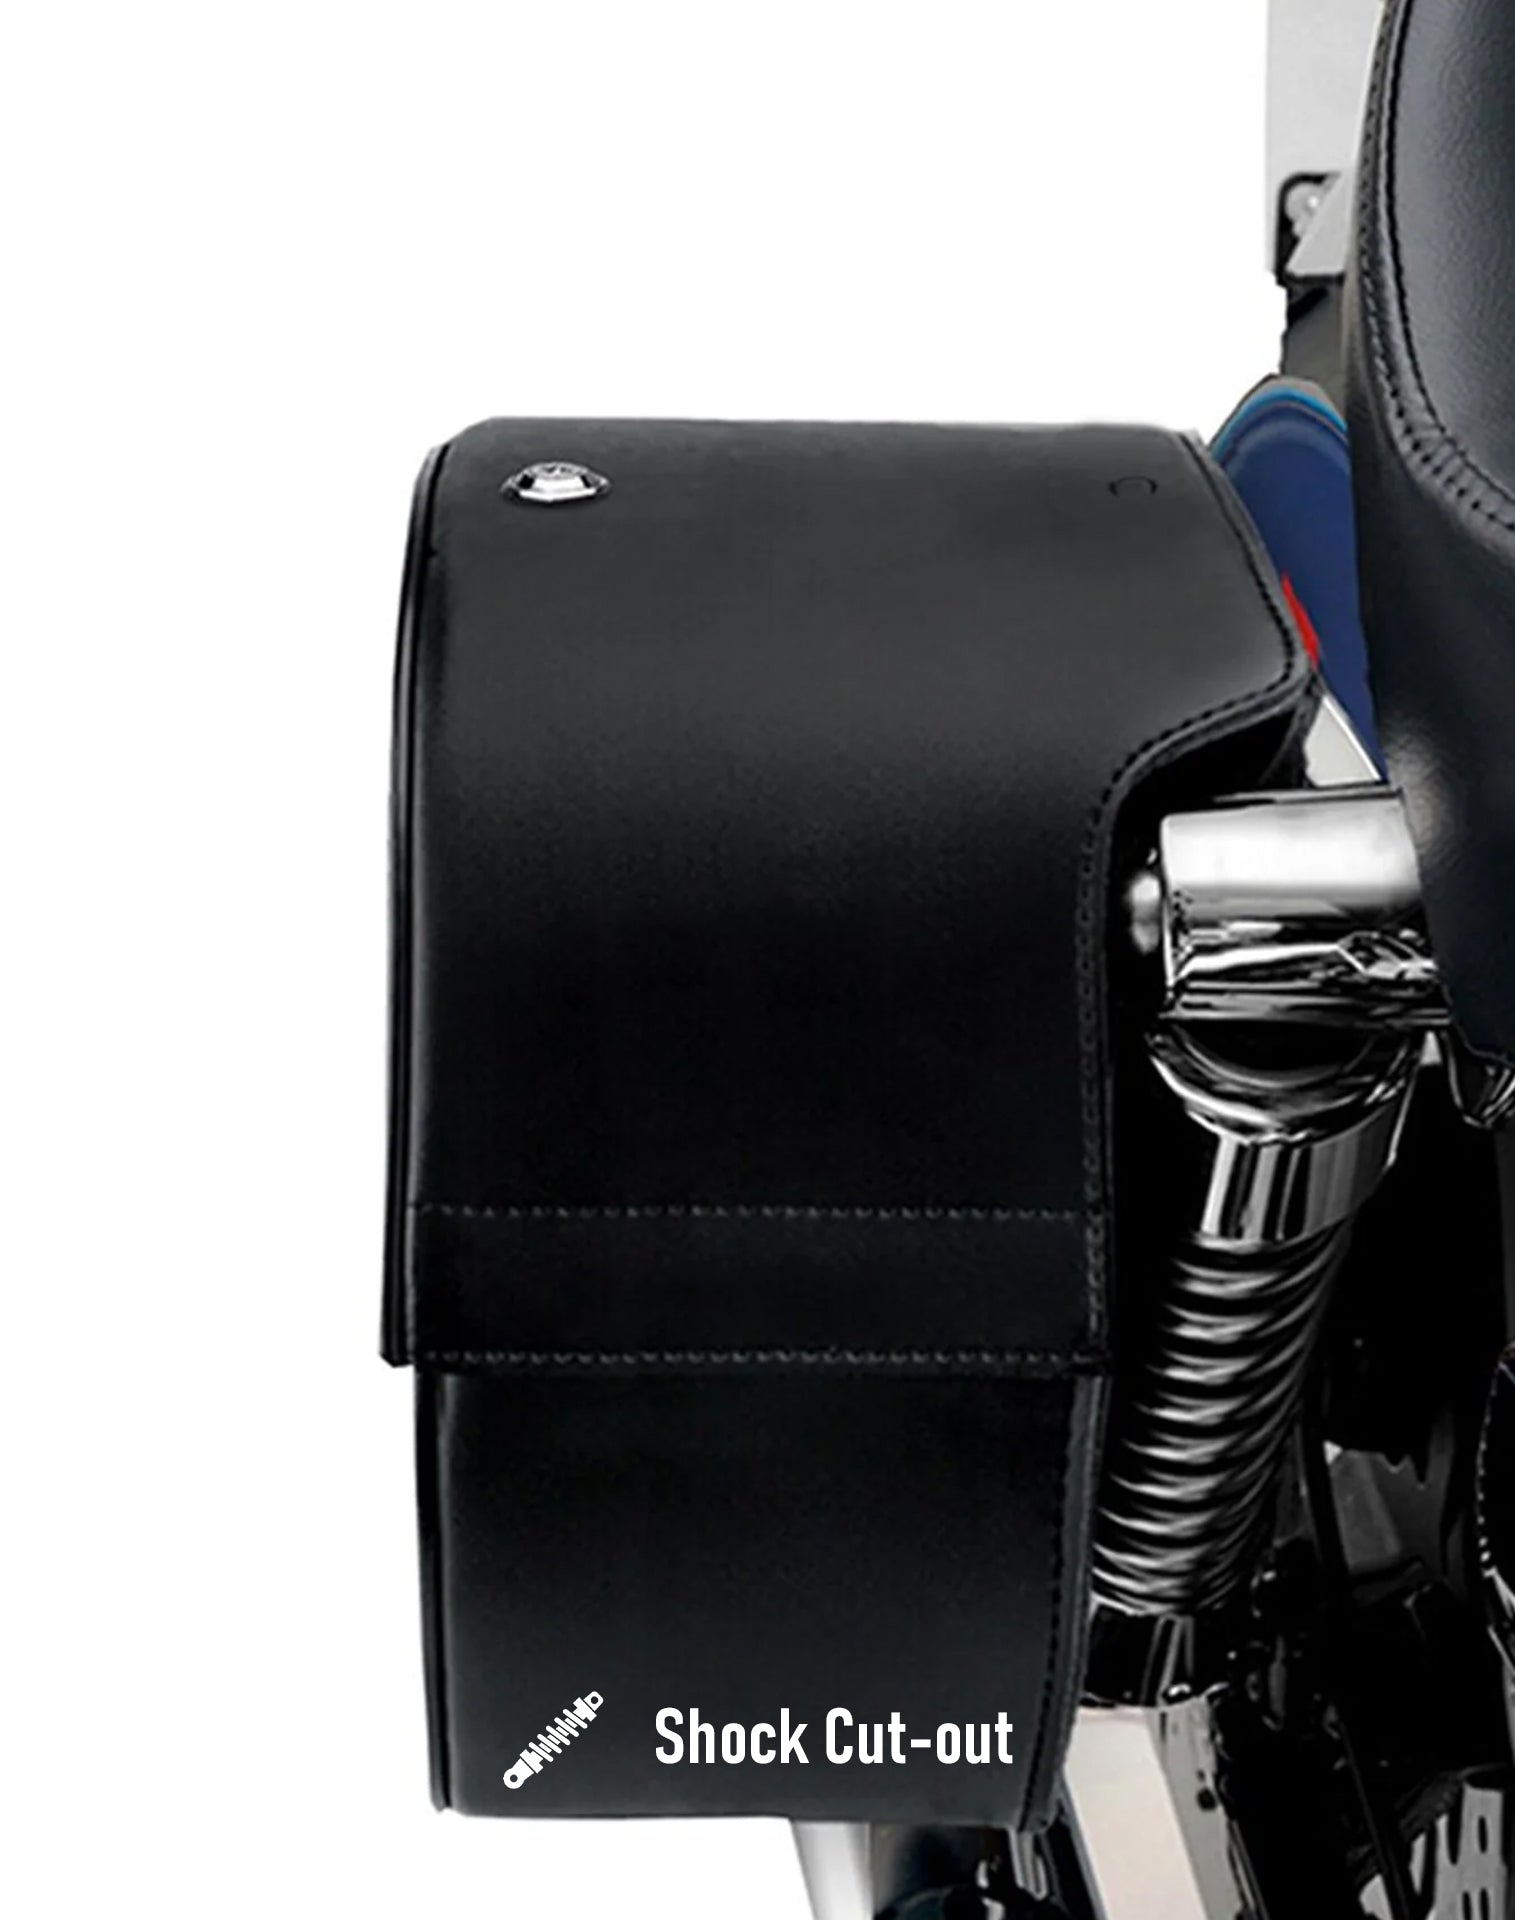 26L - Panzer Large Shock Cutout Leather Saddlebags for Harley Sportster 883 Custom XL883C/XLH883C